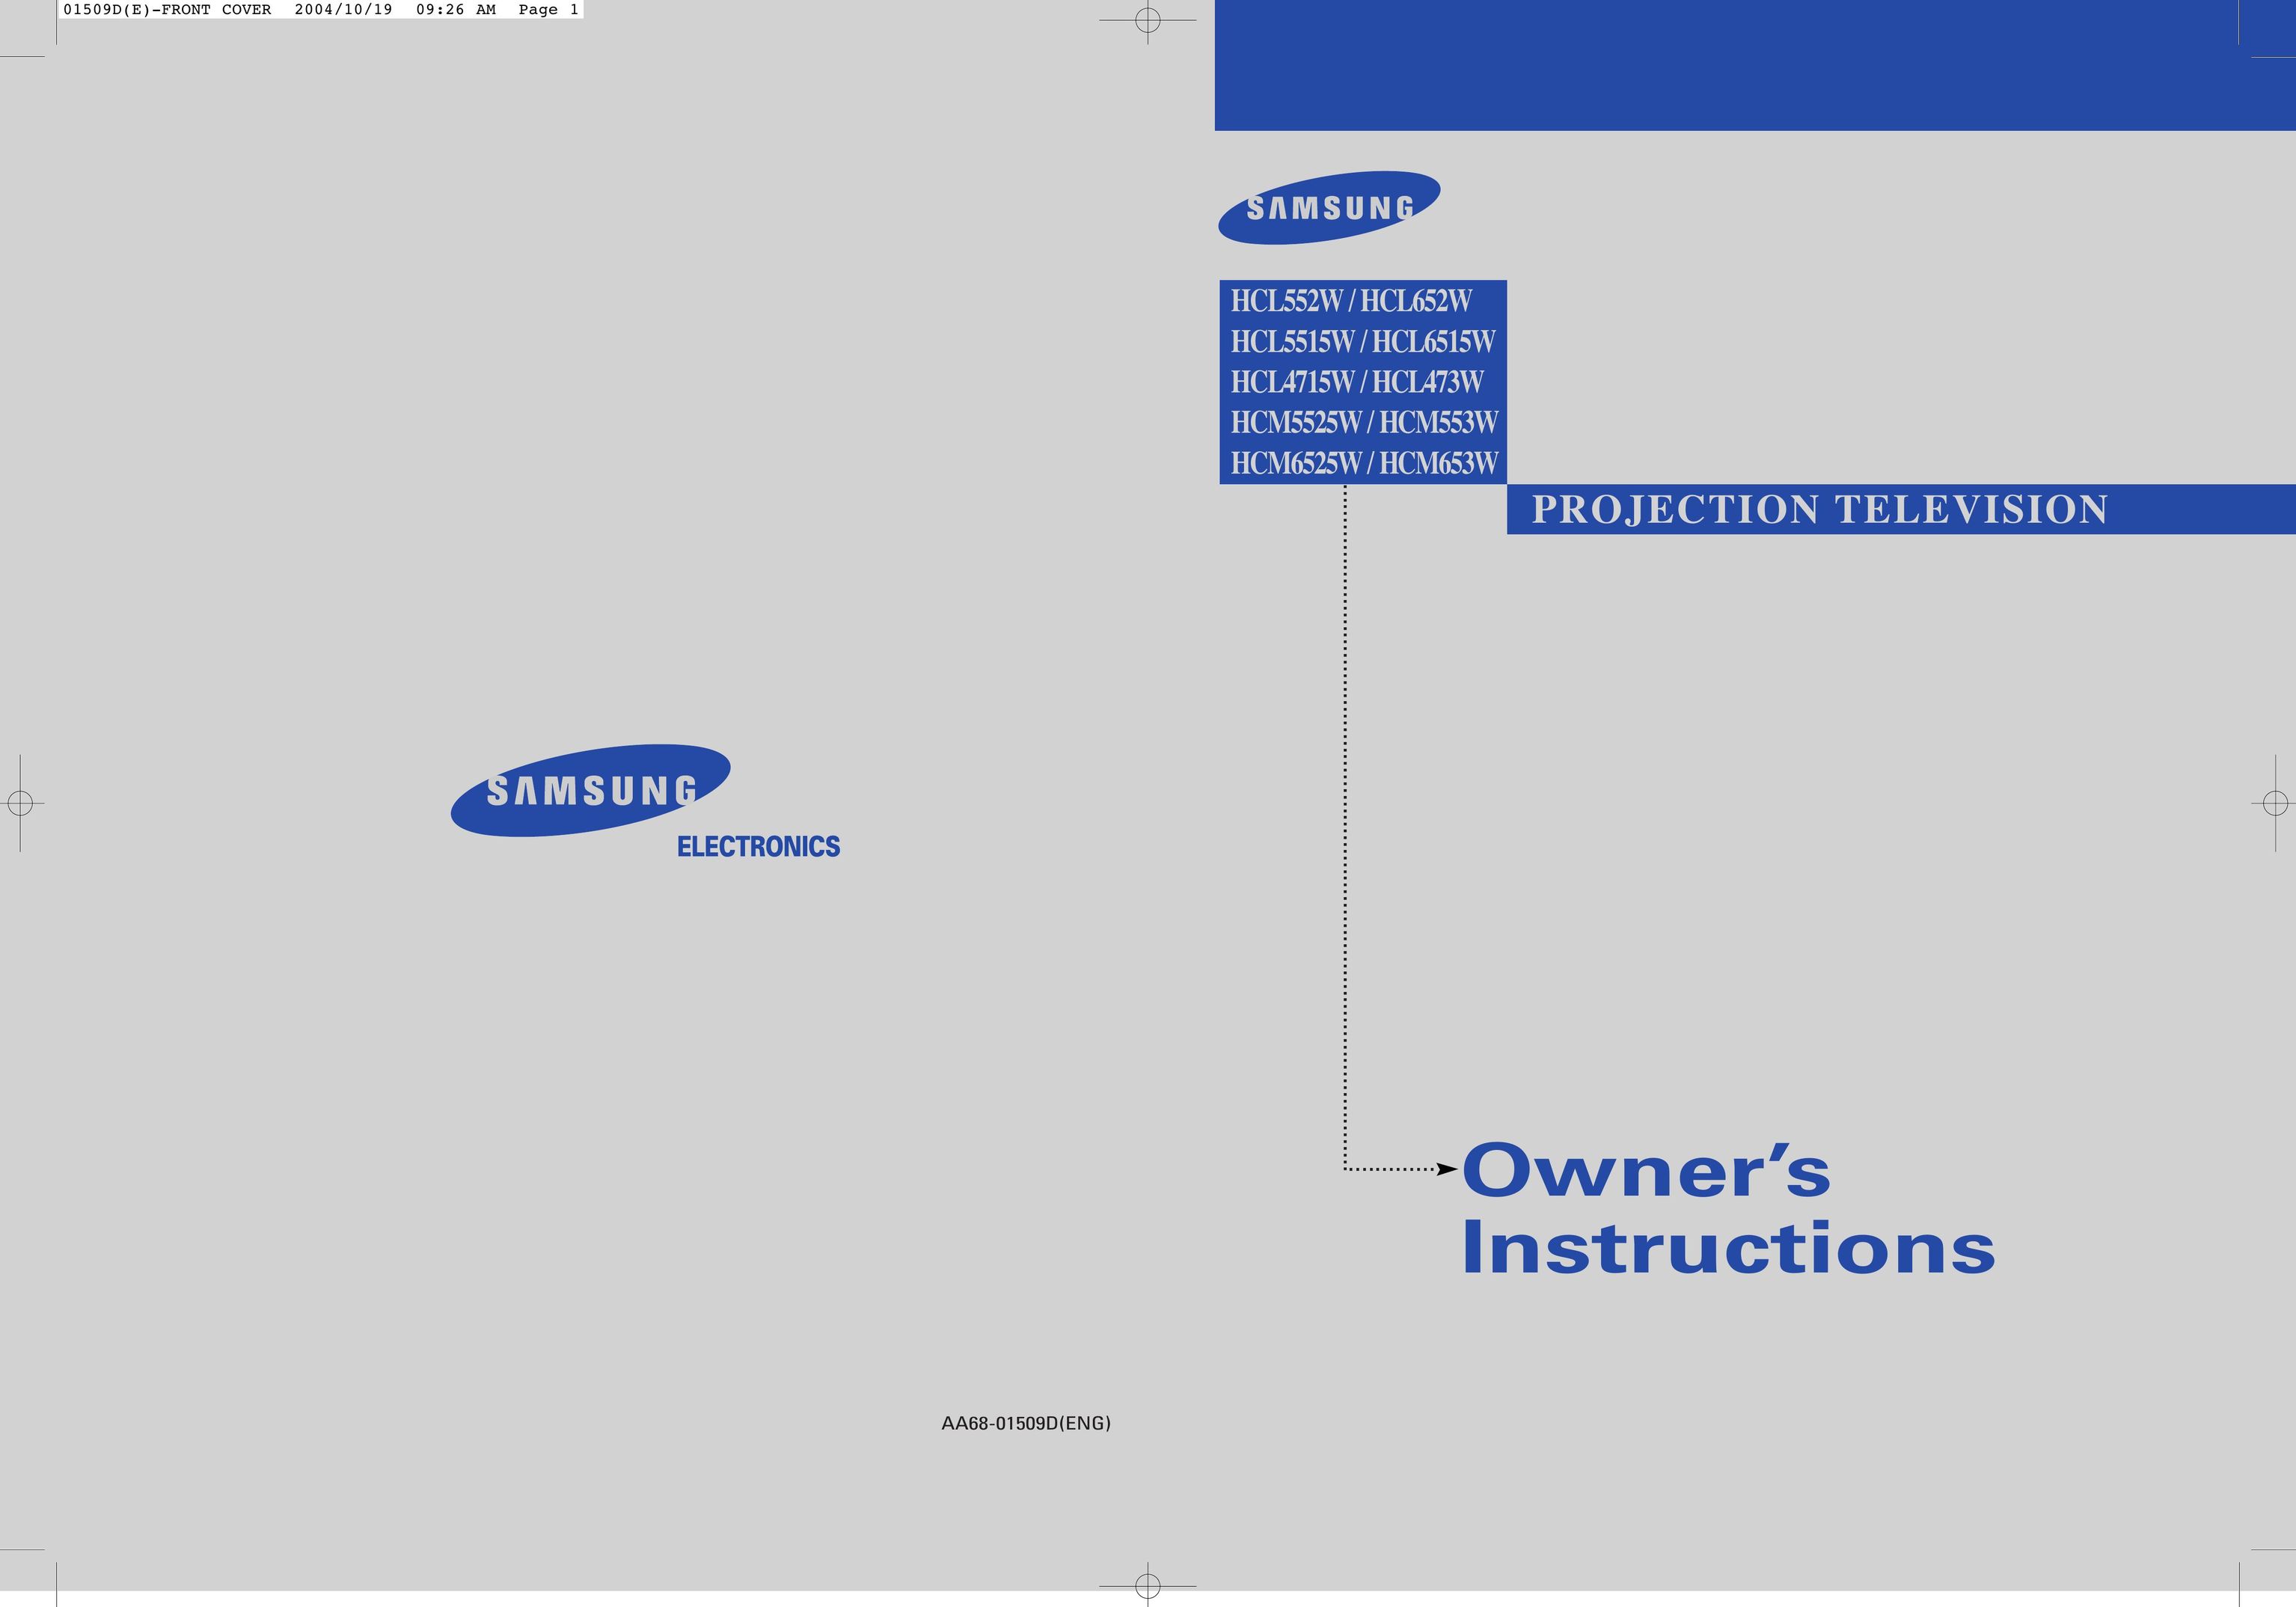 Samsung HCL 6515W Projection Television User Manual